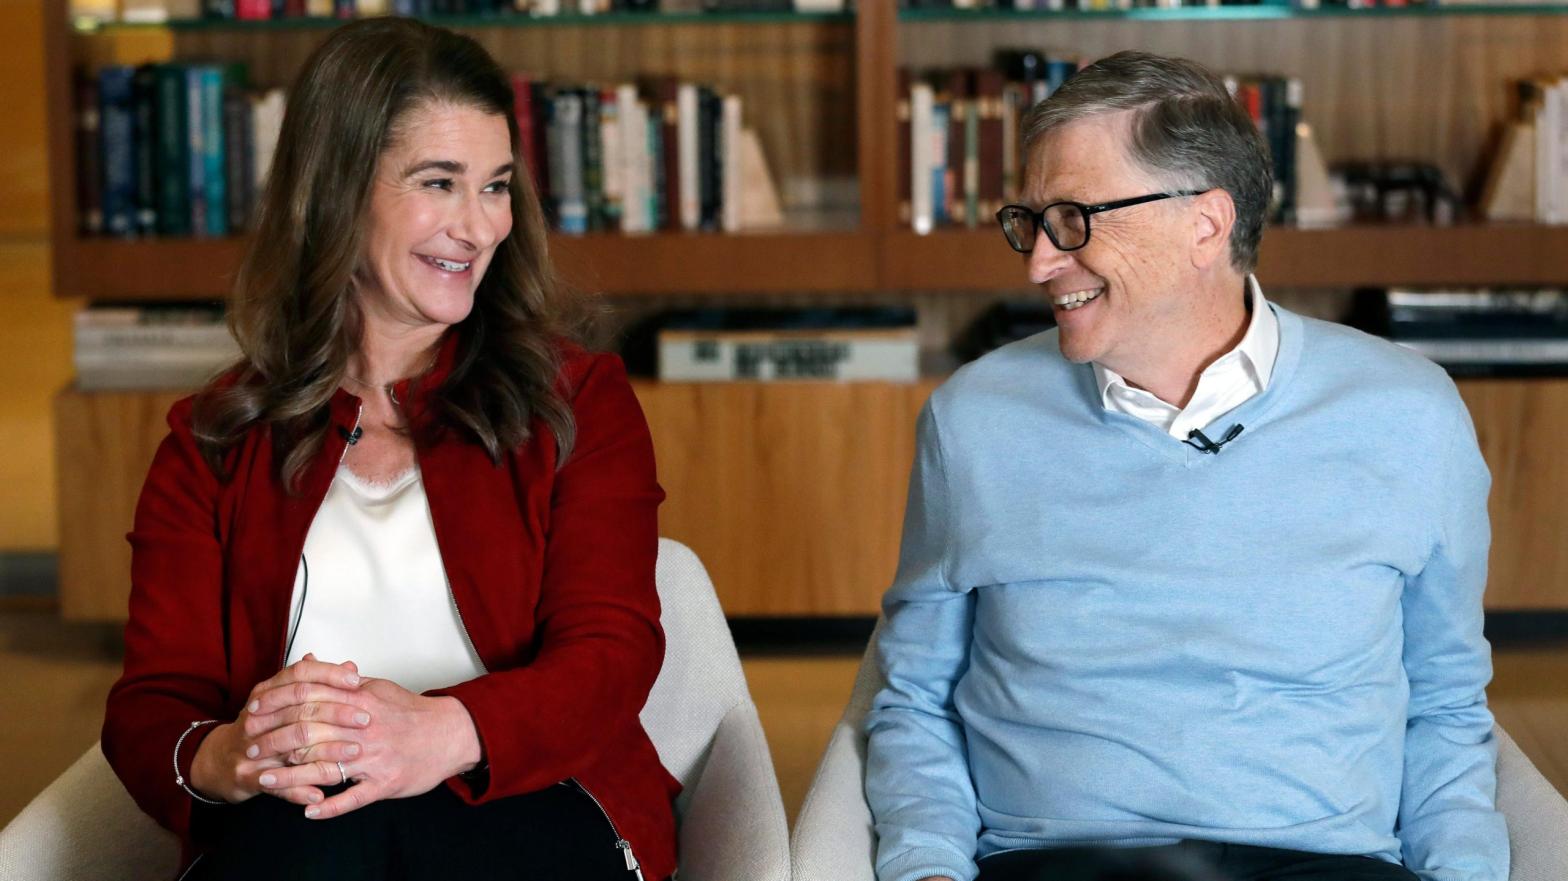 In this Feb. 1, 2019 file photo, Bill and Melinda Gates smile at each other during an interview in Kirkland, Wash. (Photo: Elaine Thompson, AP)